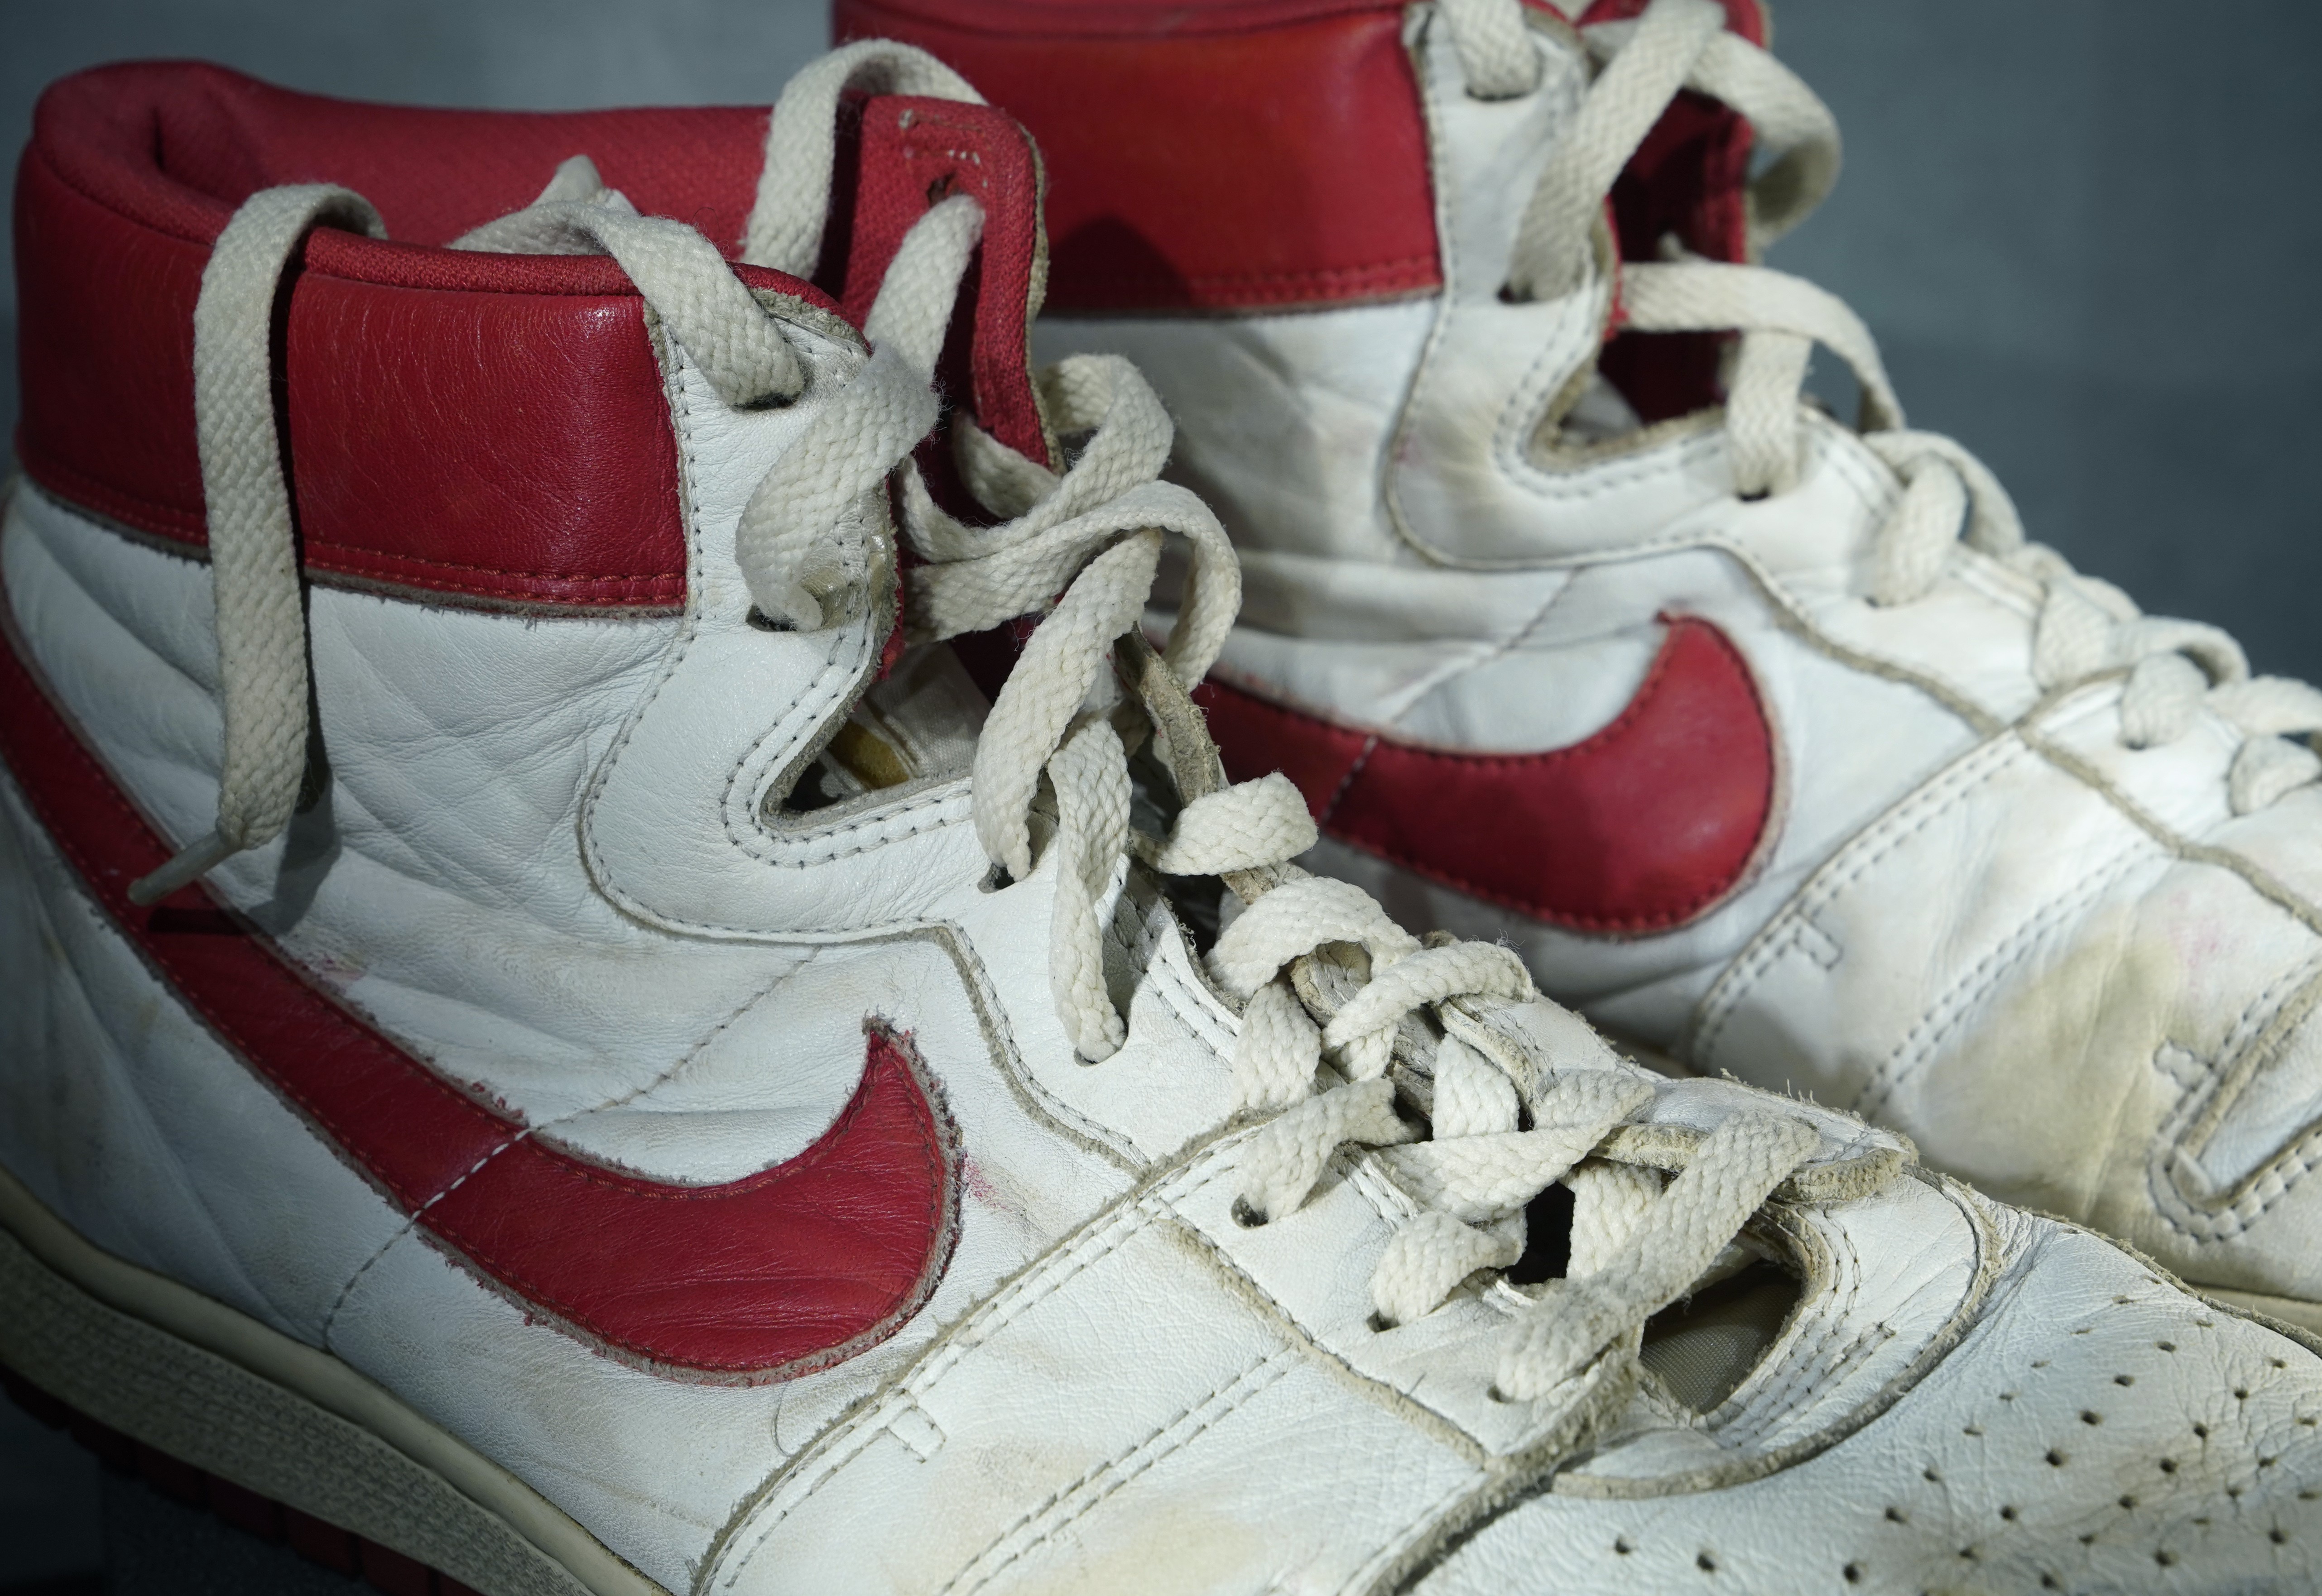 These Nike shoes are the most expensive trainers ever sold at an auction